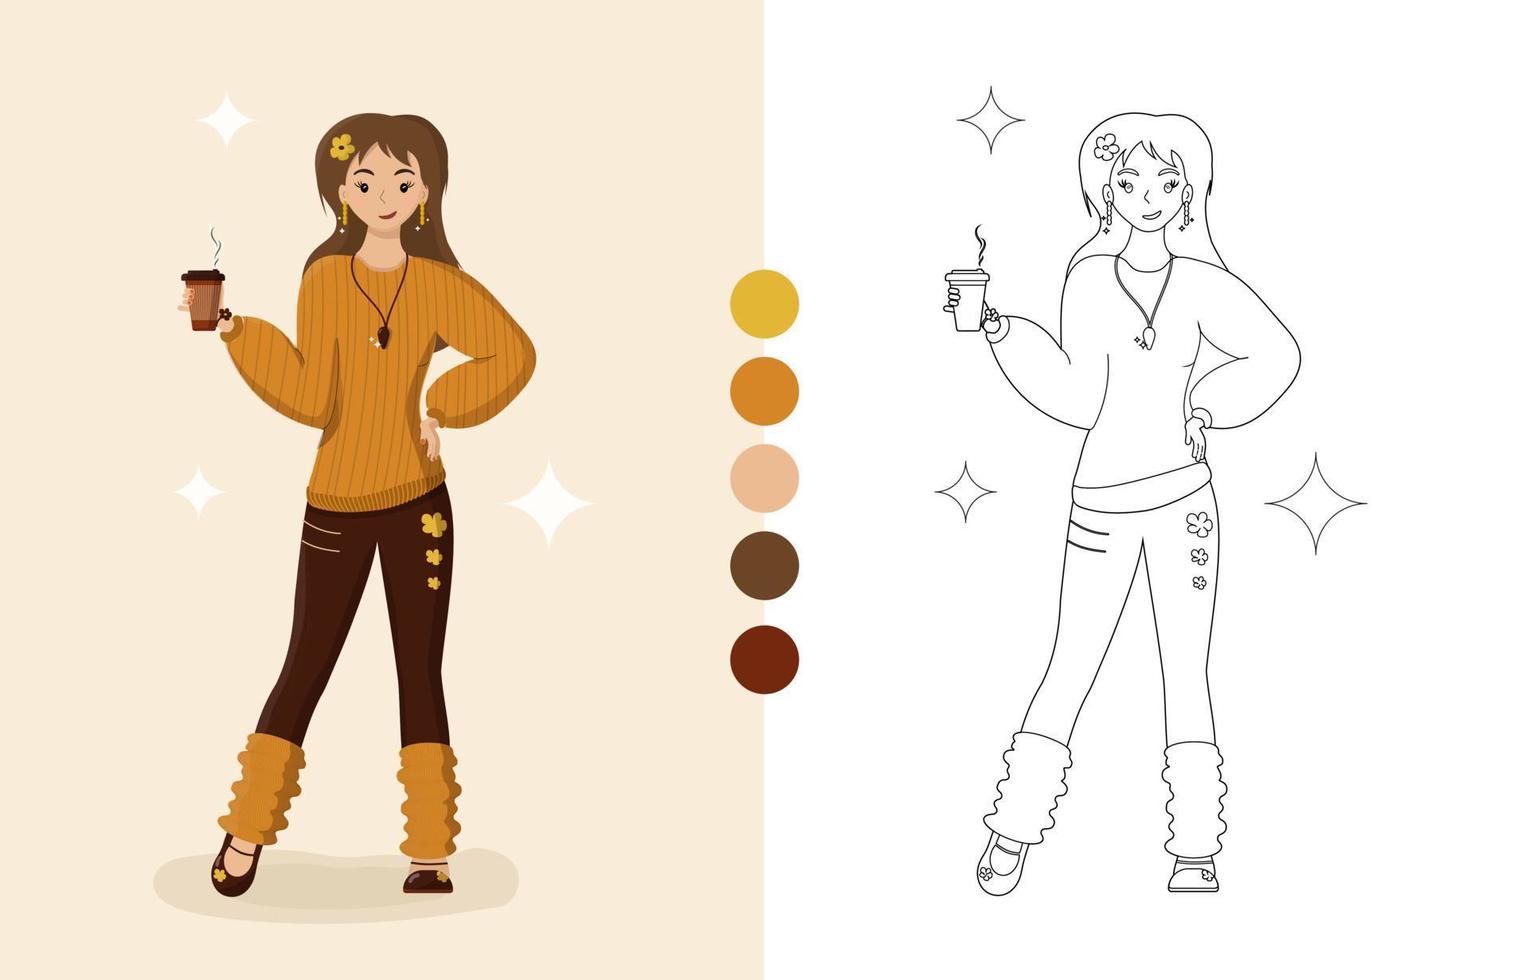 Girl coffee coloring book. Vector illustration. Woman in orange striped sweater and brown pants.